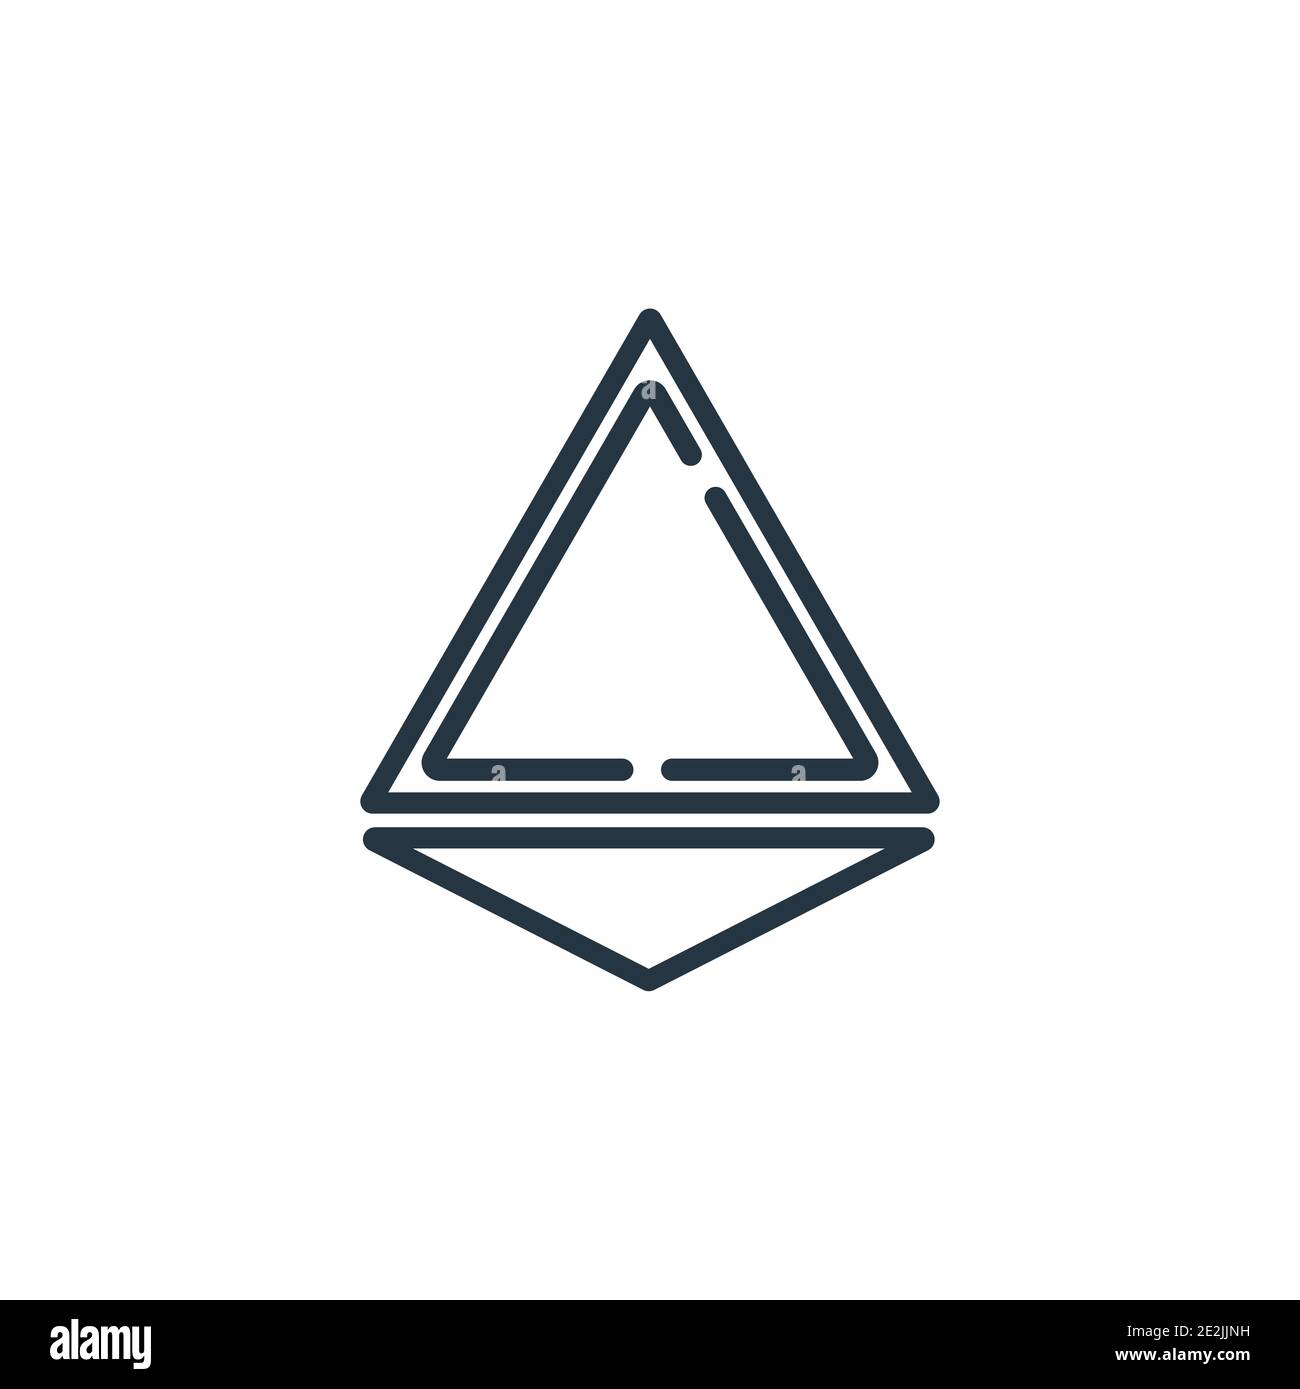 Tetrahedron outline vector icon. Thin line black tetrahedron icon, flat vector simple element illustration from editable geometry concept isolated str Stock Vector